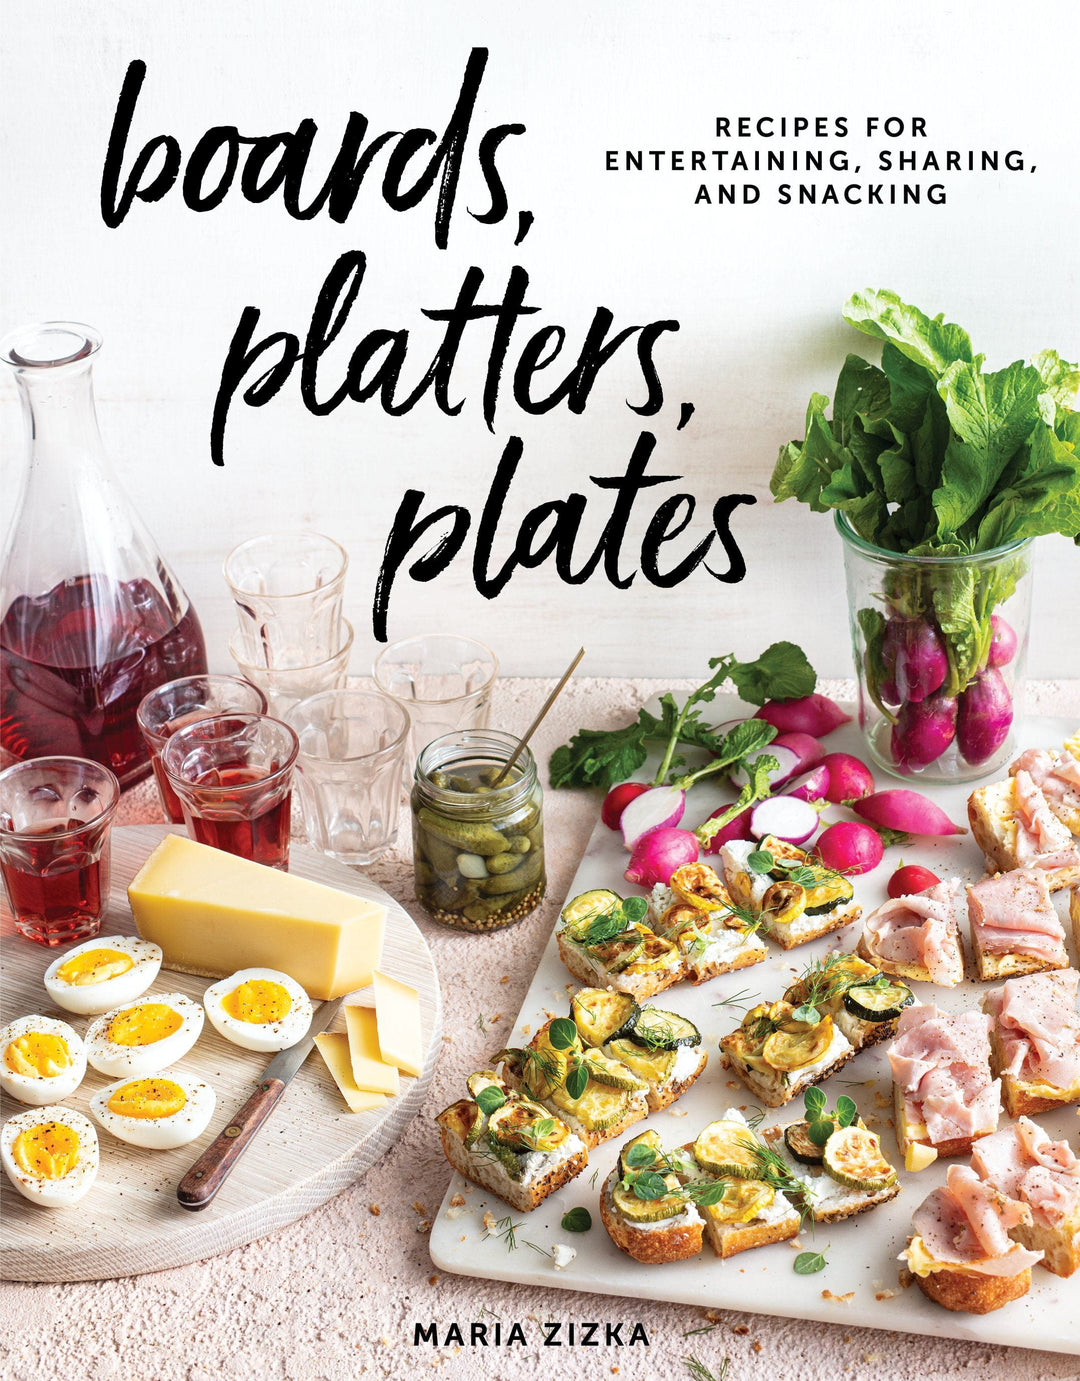 Boards, Platters, and Plates Cookbook Workman Publishing 